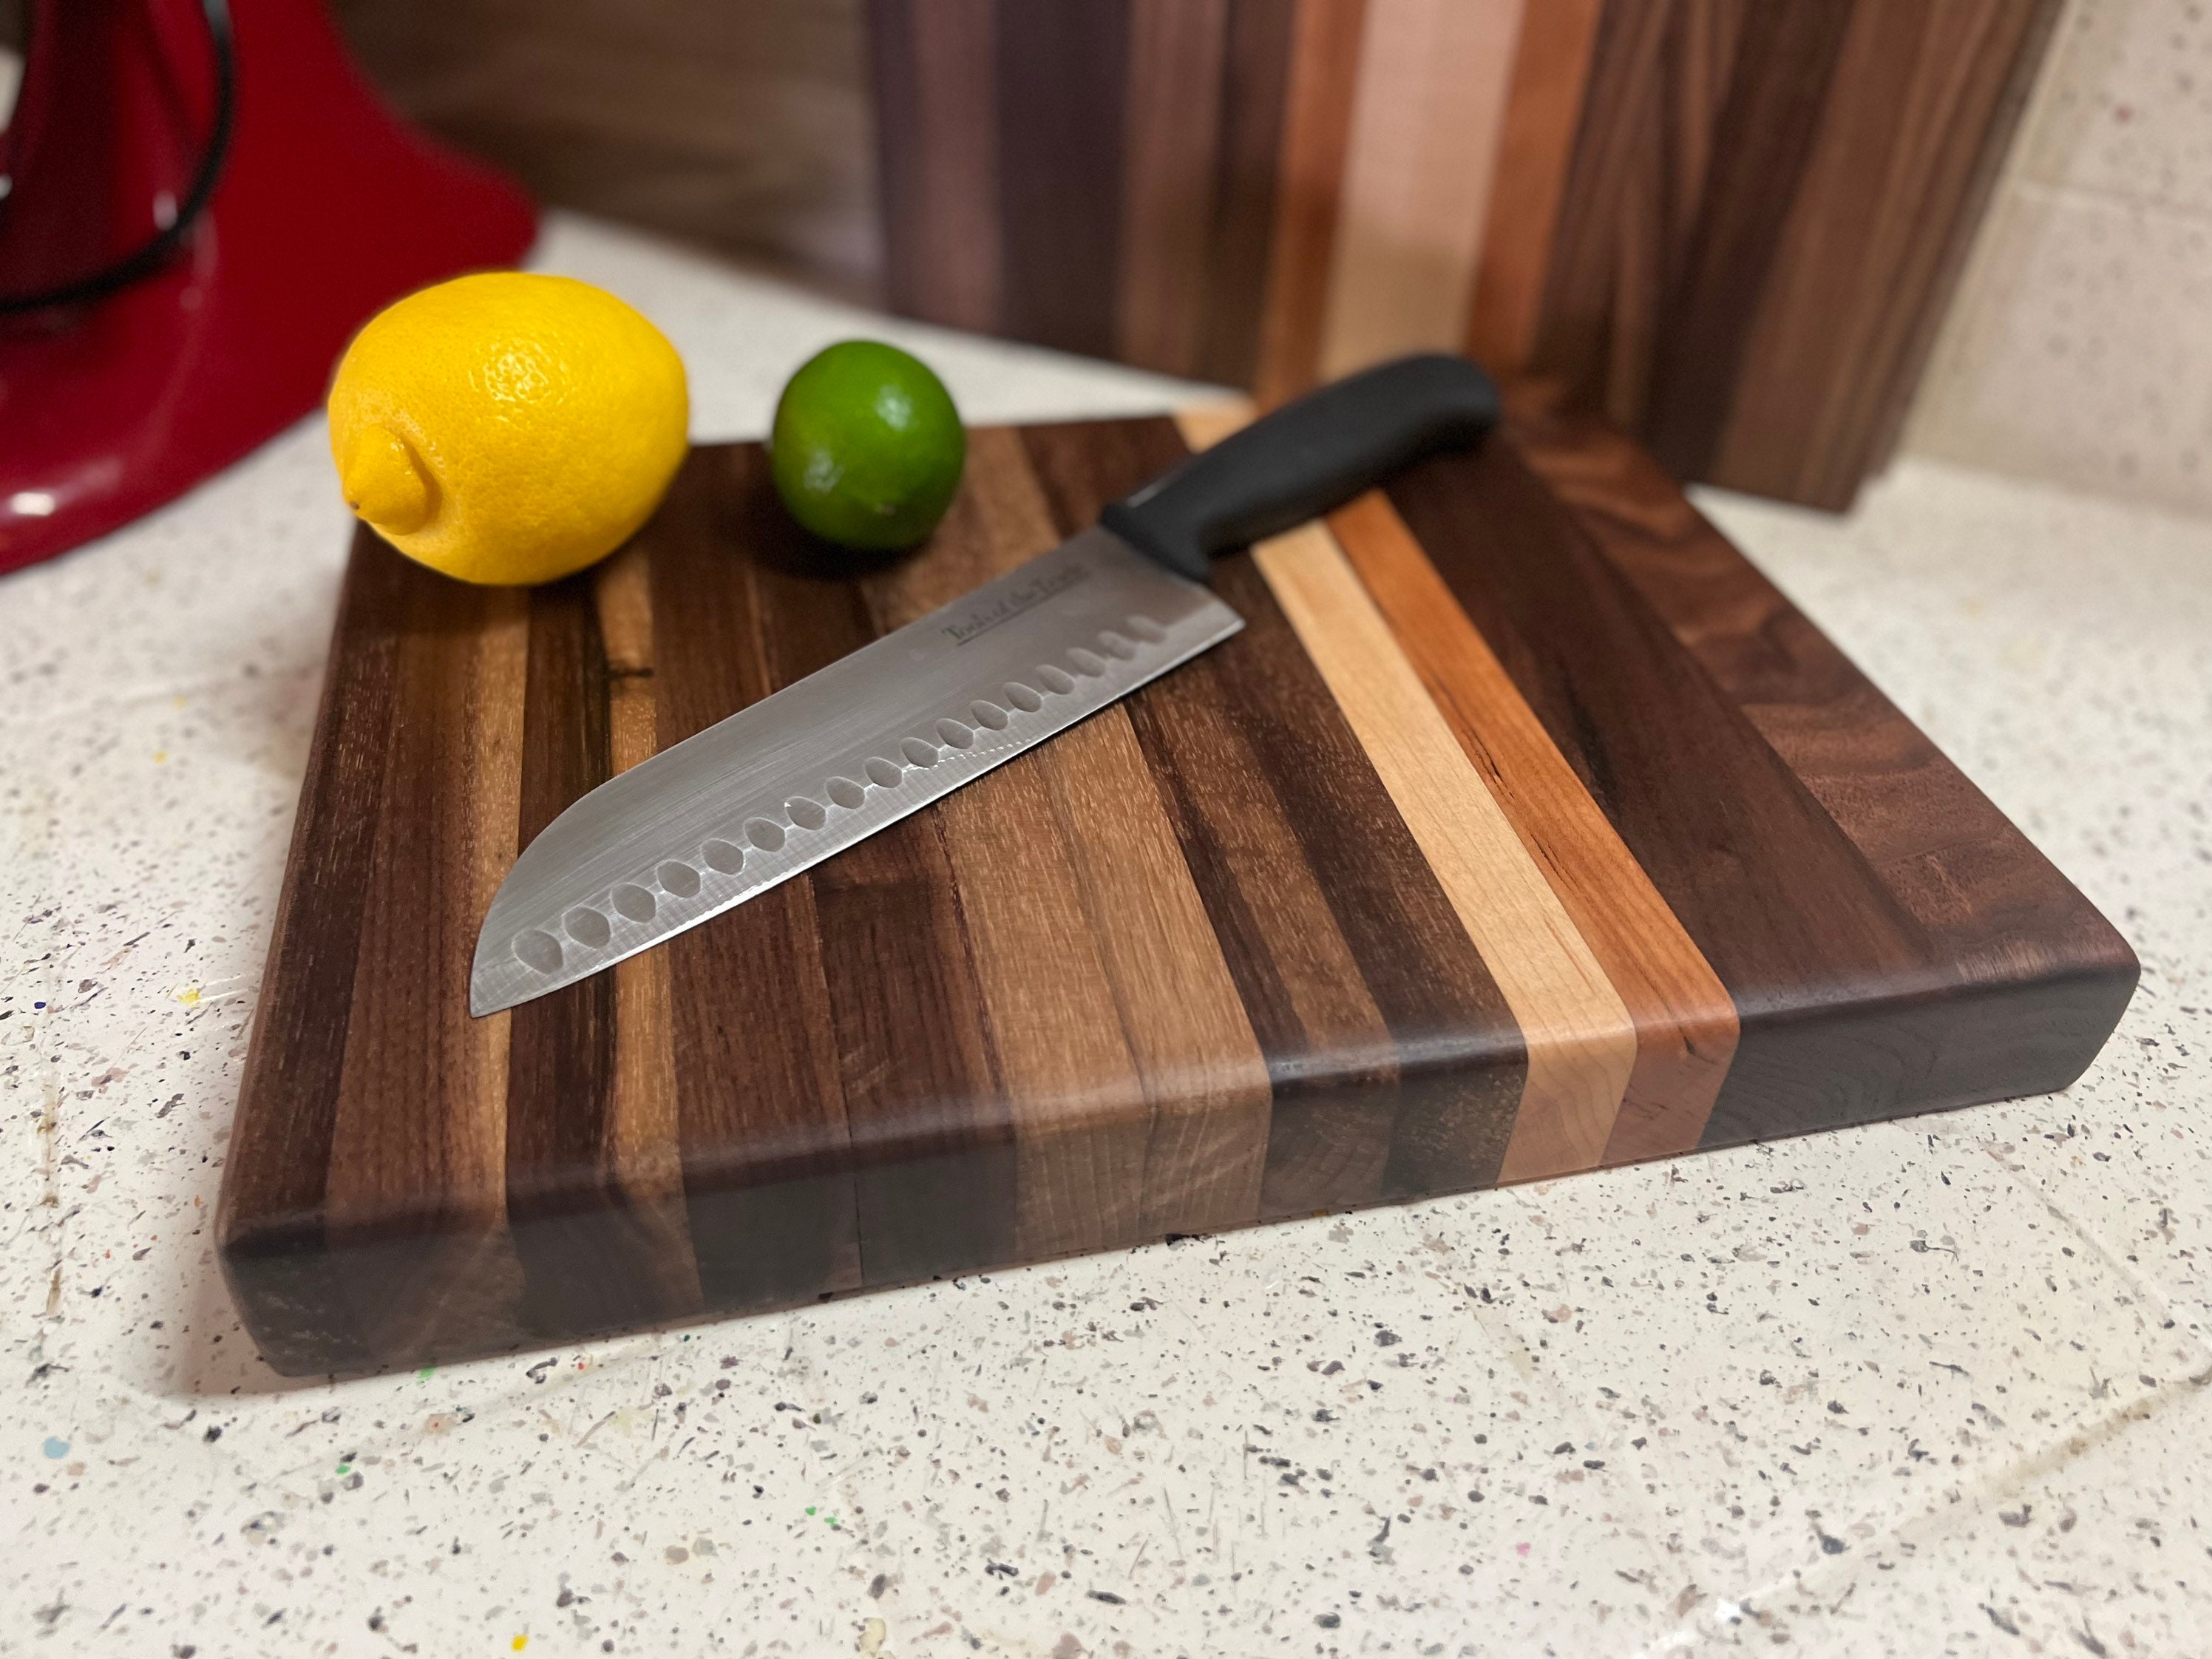 2 in 1: beautiful wood chopping boards & decoration element #wood